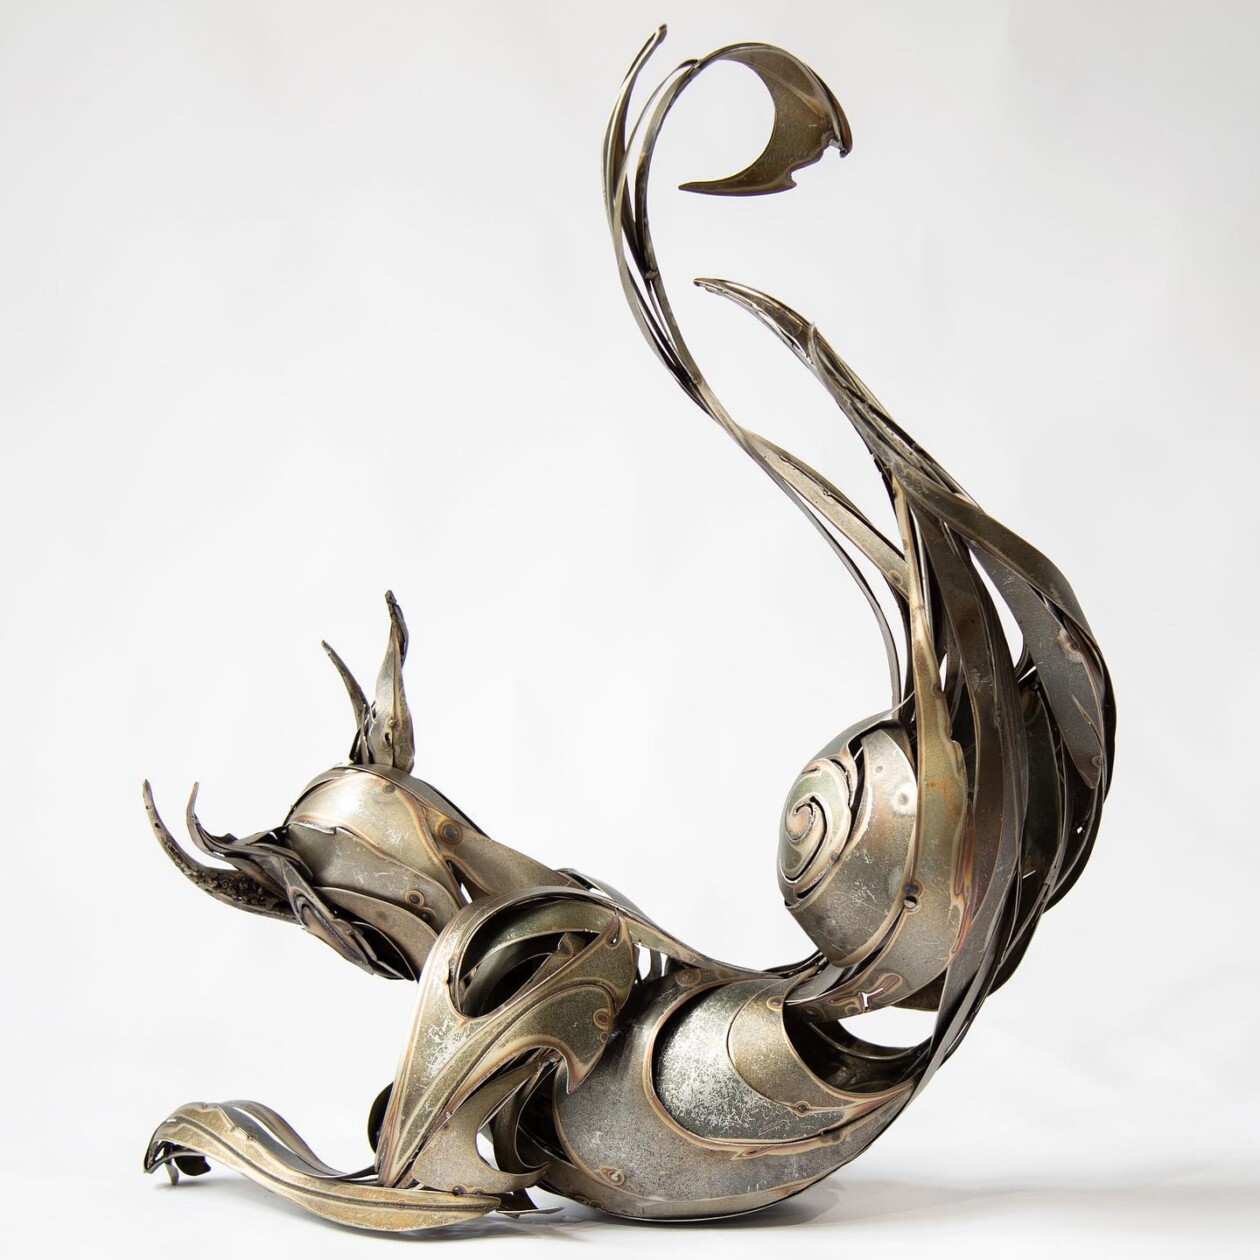 Magnificent Metallic Animal Sculptures Made With Sweeping Lines By Georgie Seccull (16)